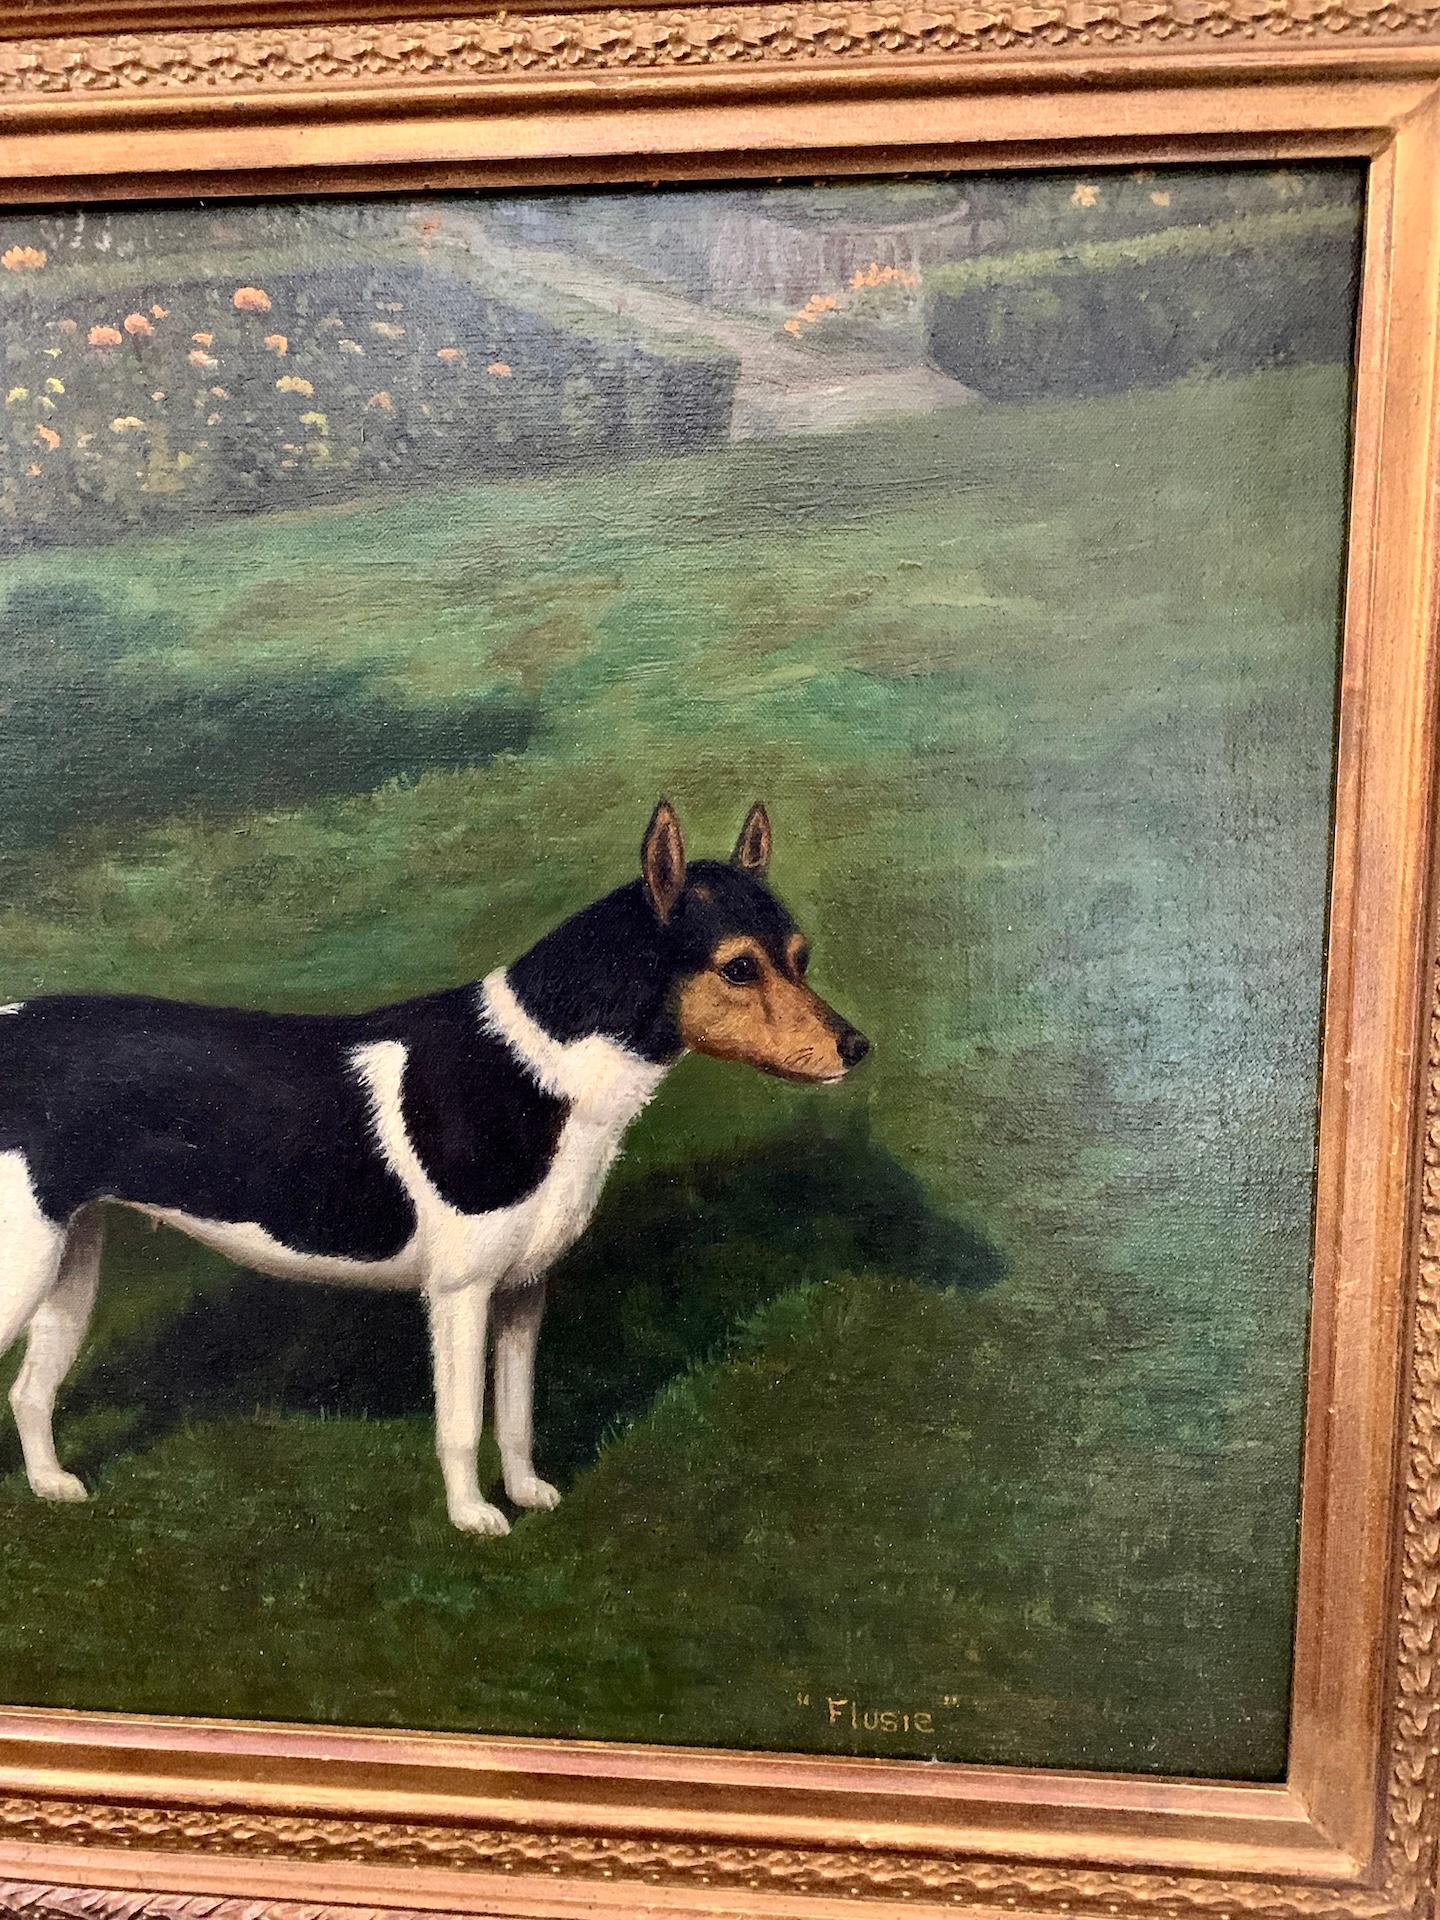 English Portrait of a Jack Russell Terrier dog in a landscape, 'Flusie' - Painting by William Albert Clark